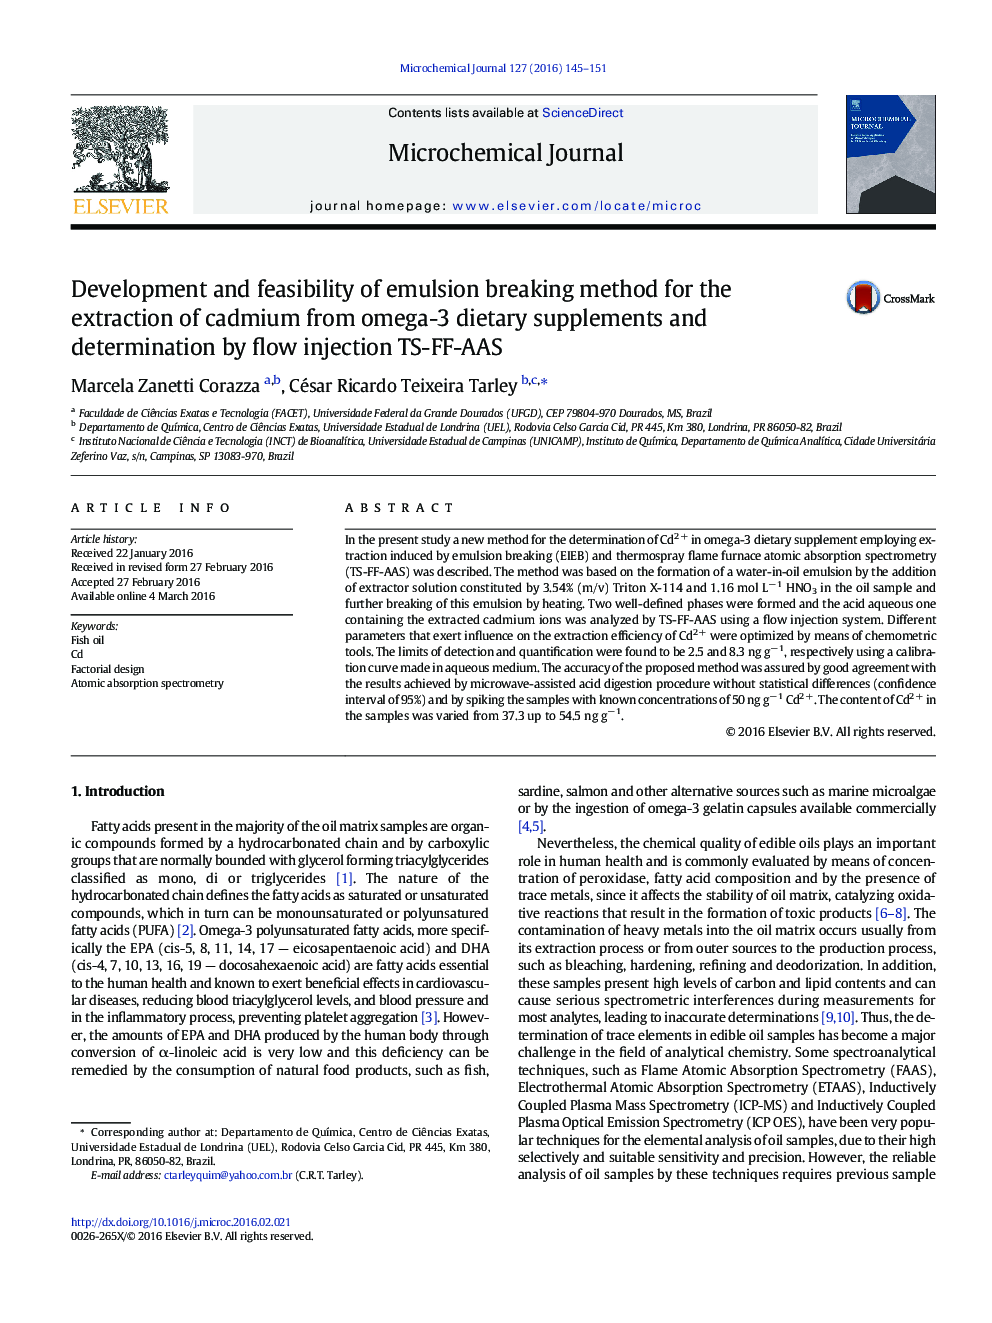 Development and feasibility of emulsion breaking method for the extraction of cadmium from omega-3 dietary supplements and determination by flow injection TS-FF-AAS